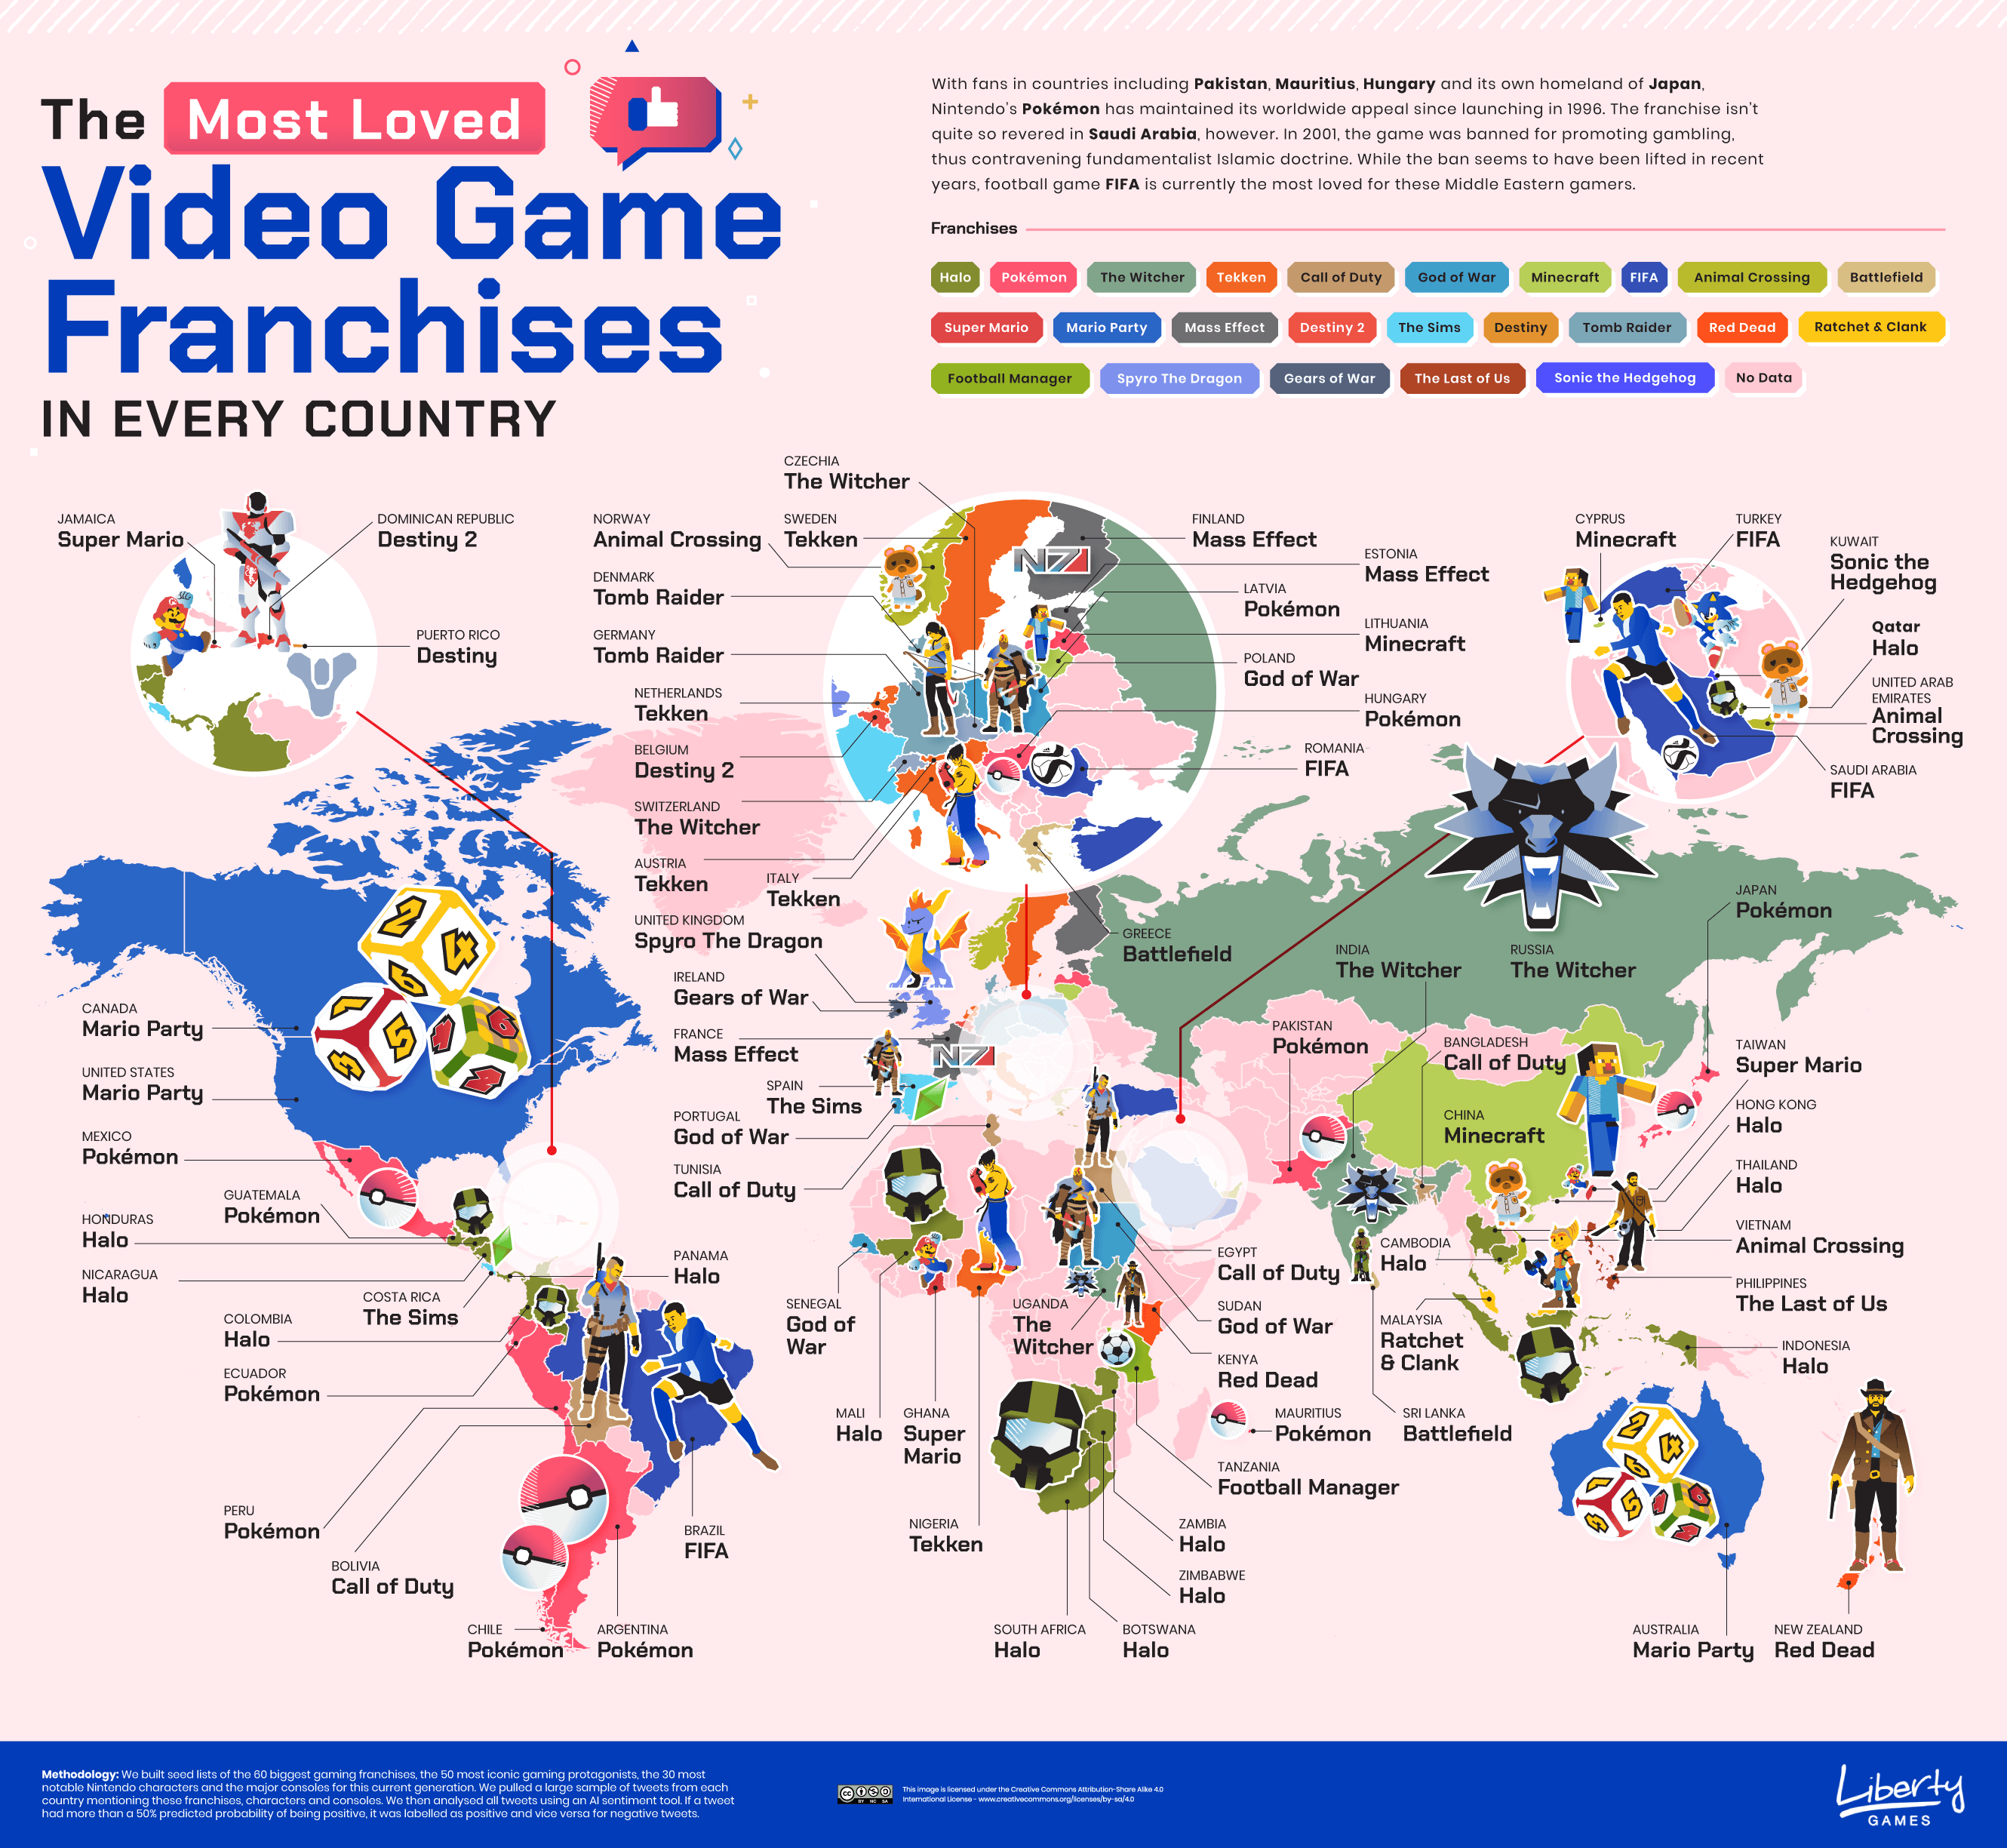 The Most Beloved Video Games across Europe